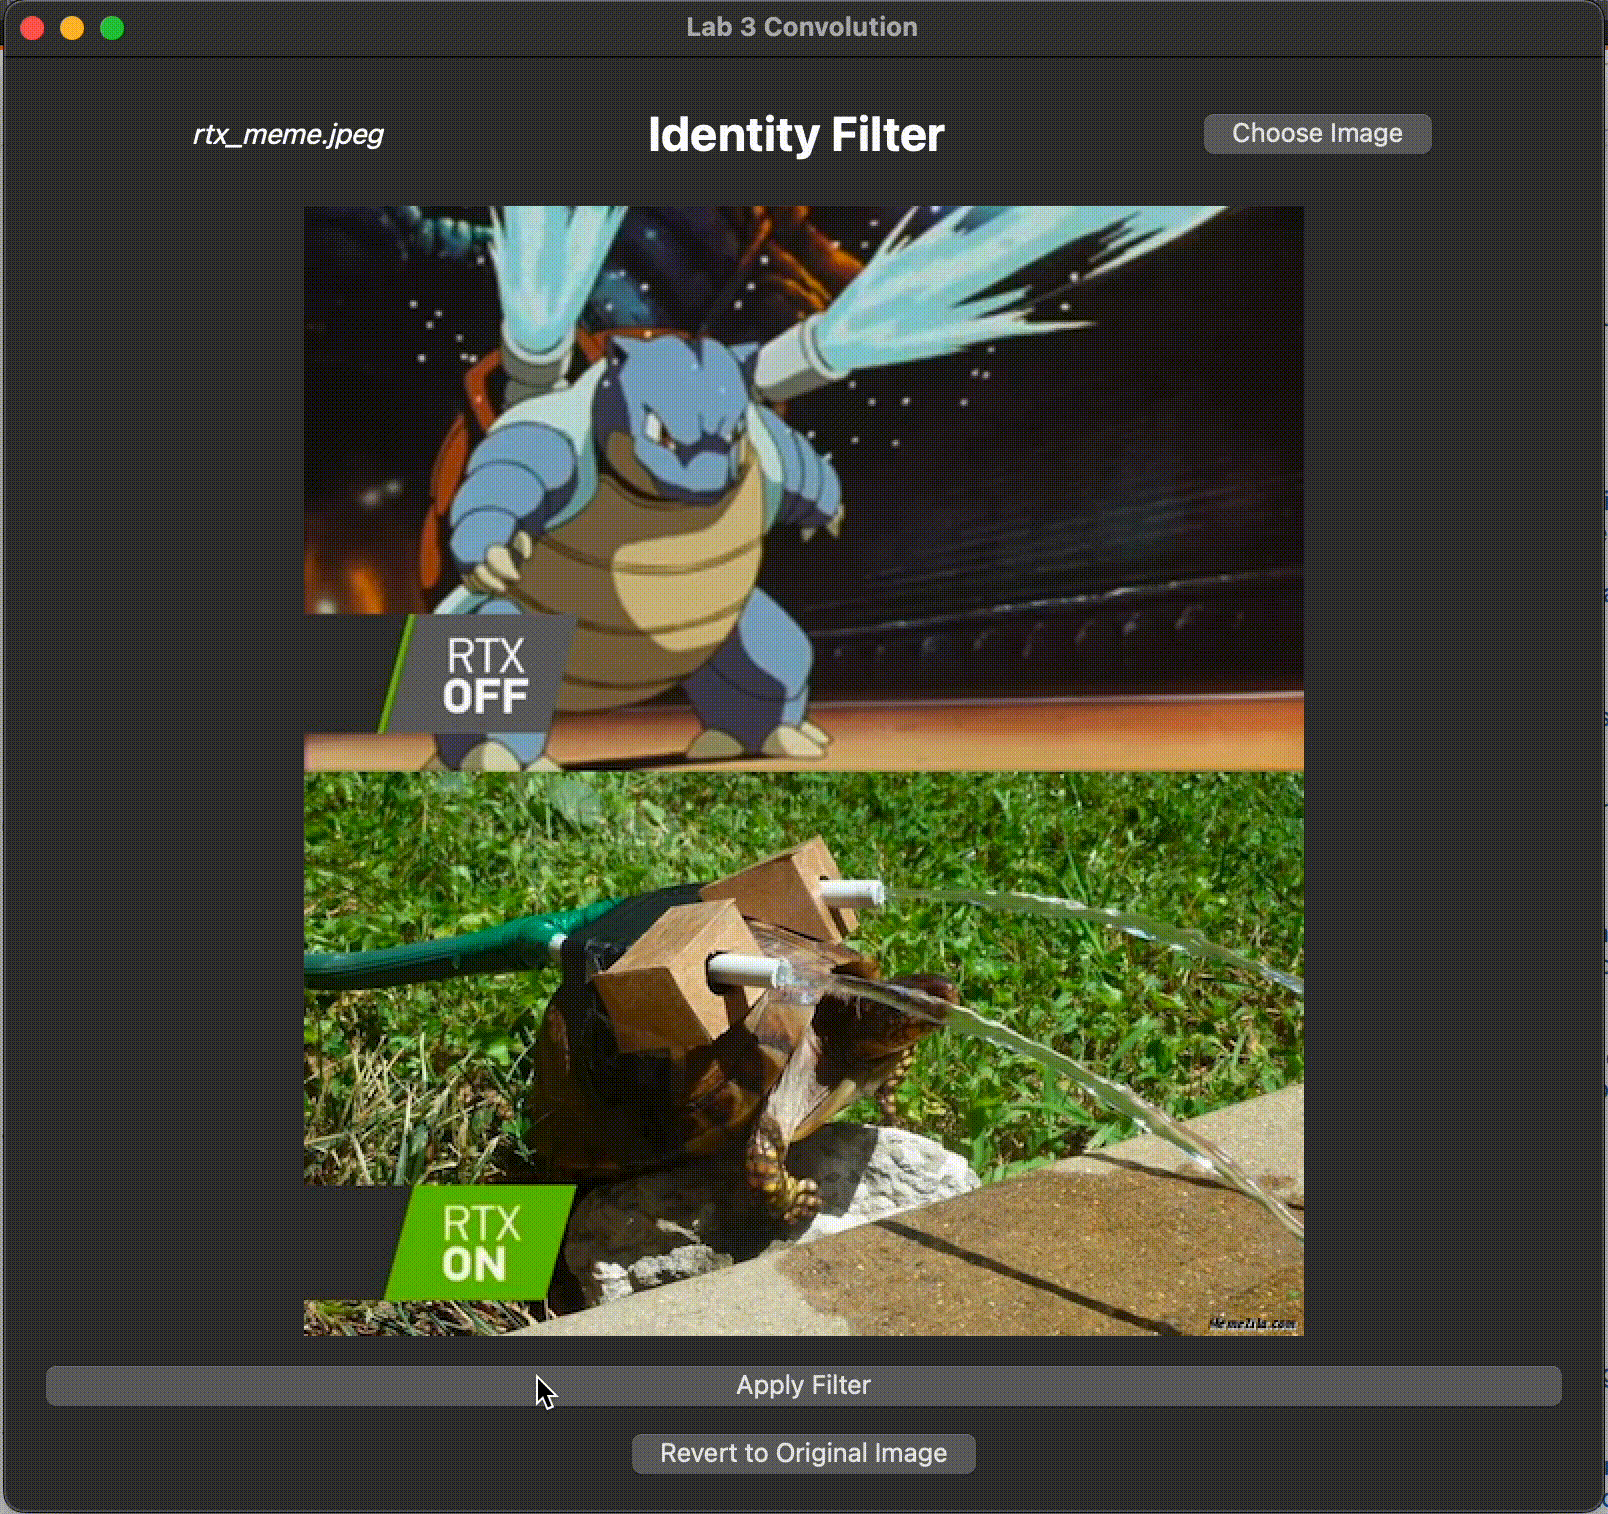 An identity filter being applied to an image